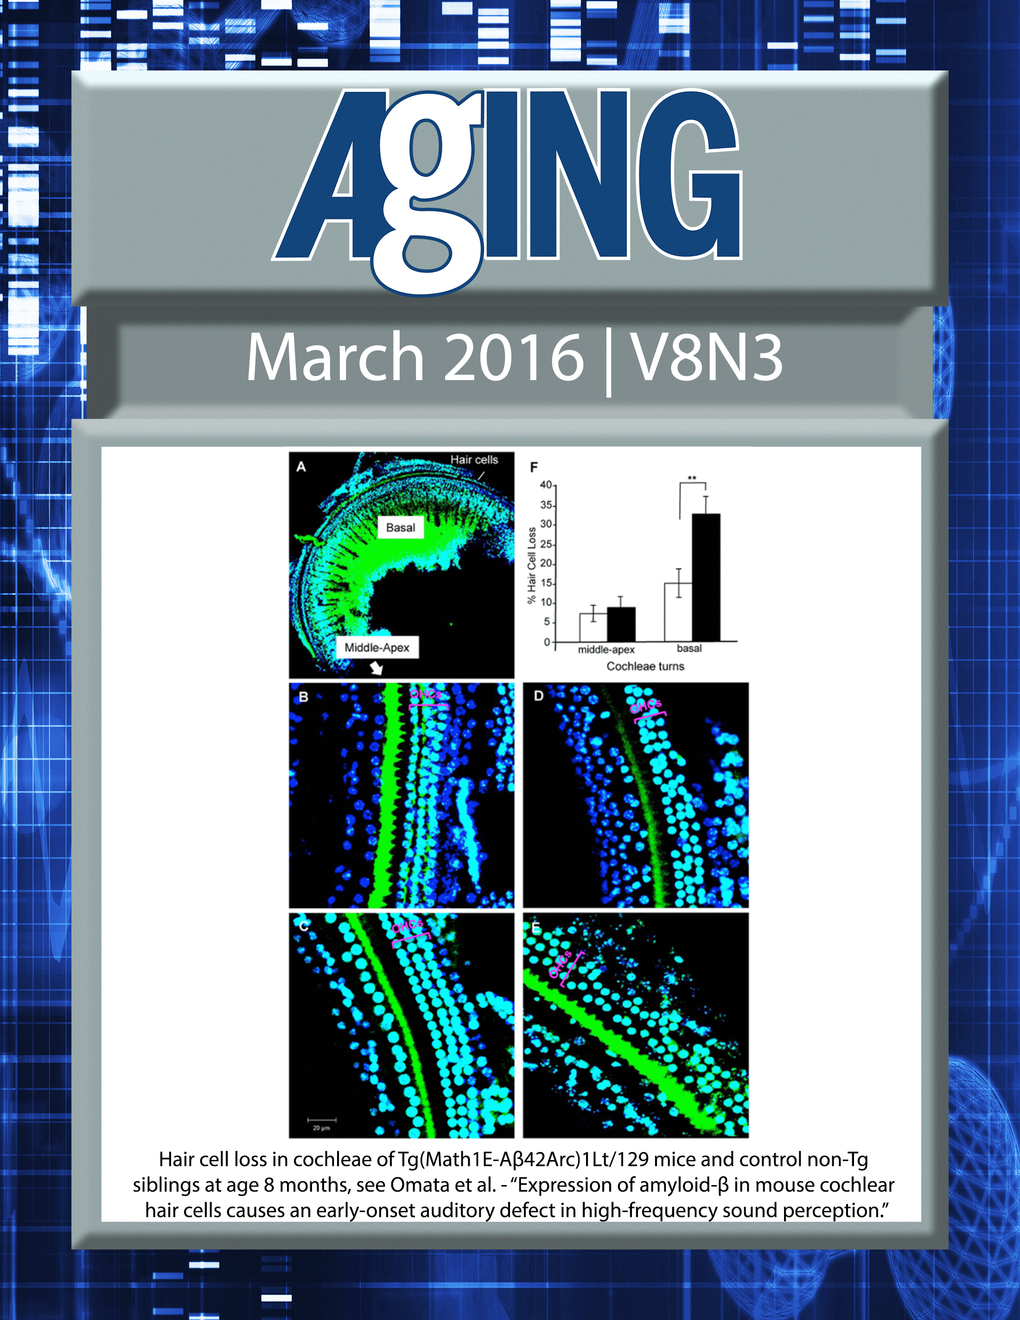 The cover for issue 3 of Aging features Figure 5, 'Expression of amyloid-β in mouse cochlear hair cells causes an early-onset auditory defect in high-frequency sound perception' from Omata et al.